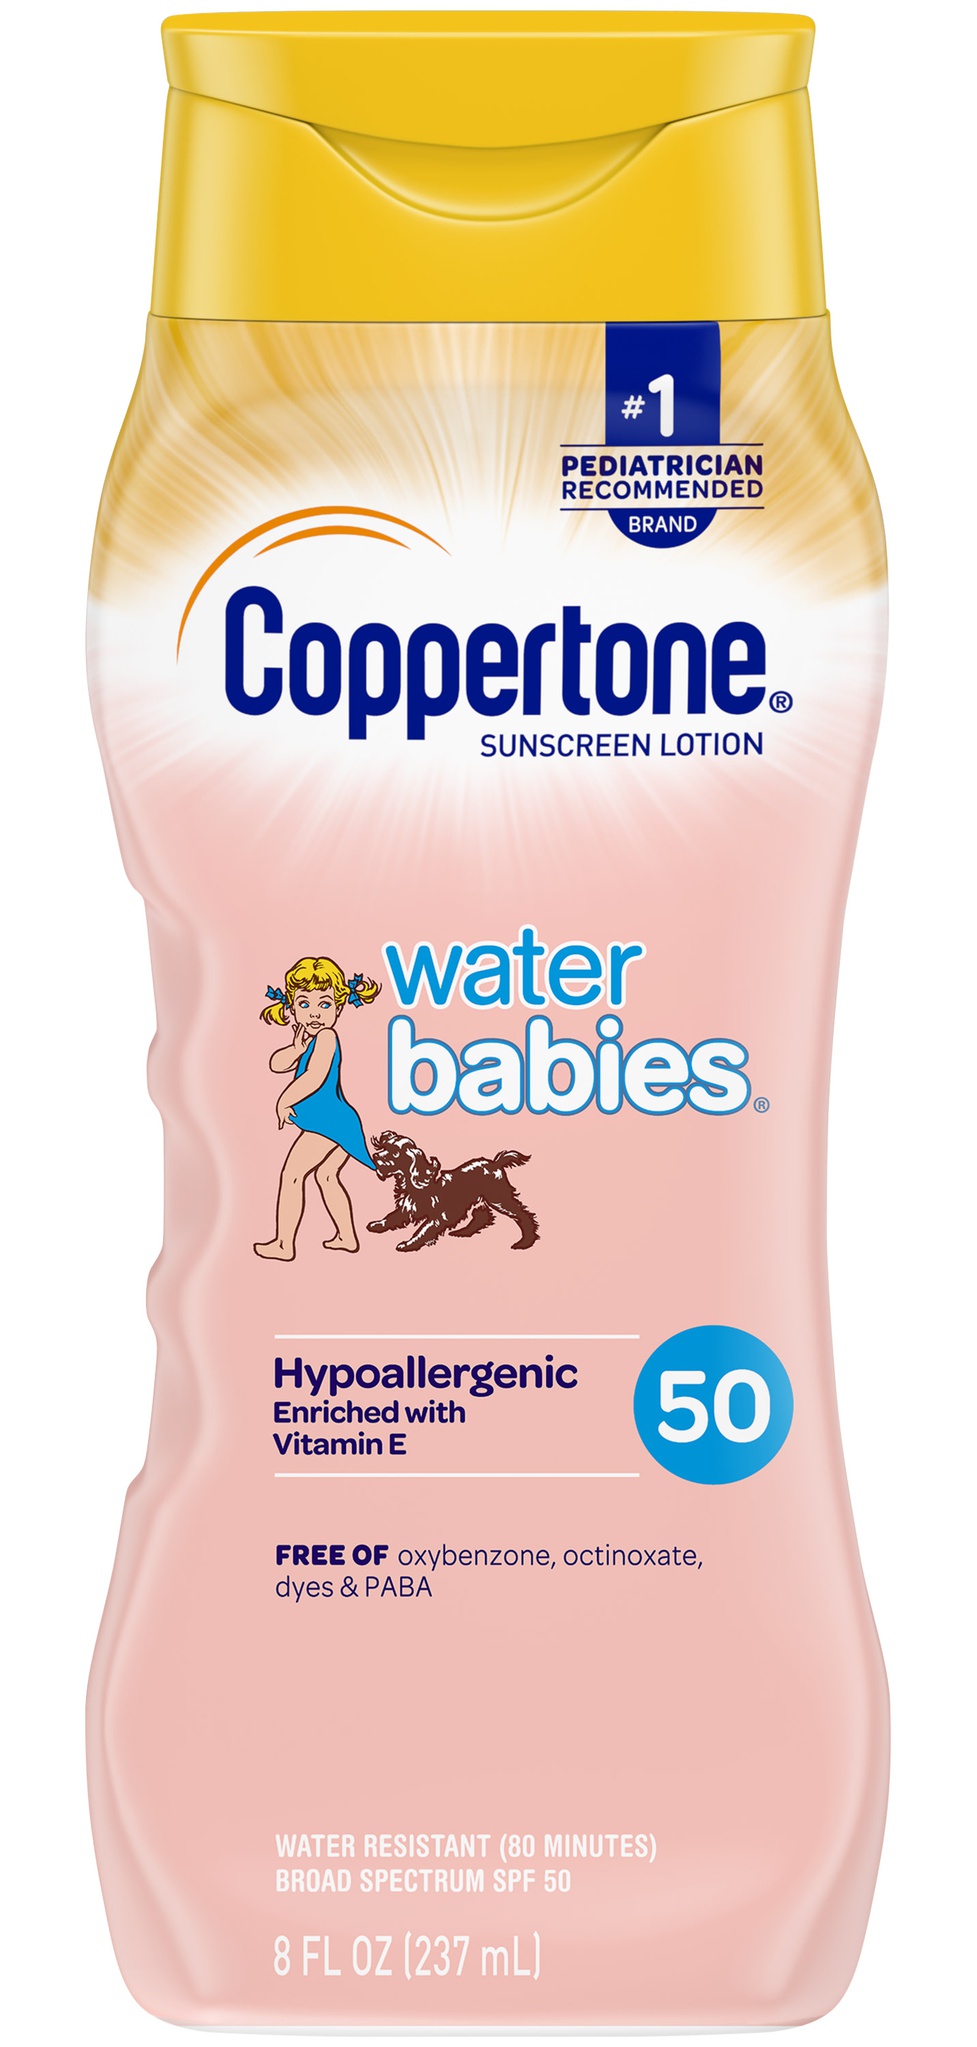 Coppertone Waterbabies SPF 50 Baby Sunscreen Lotion